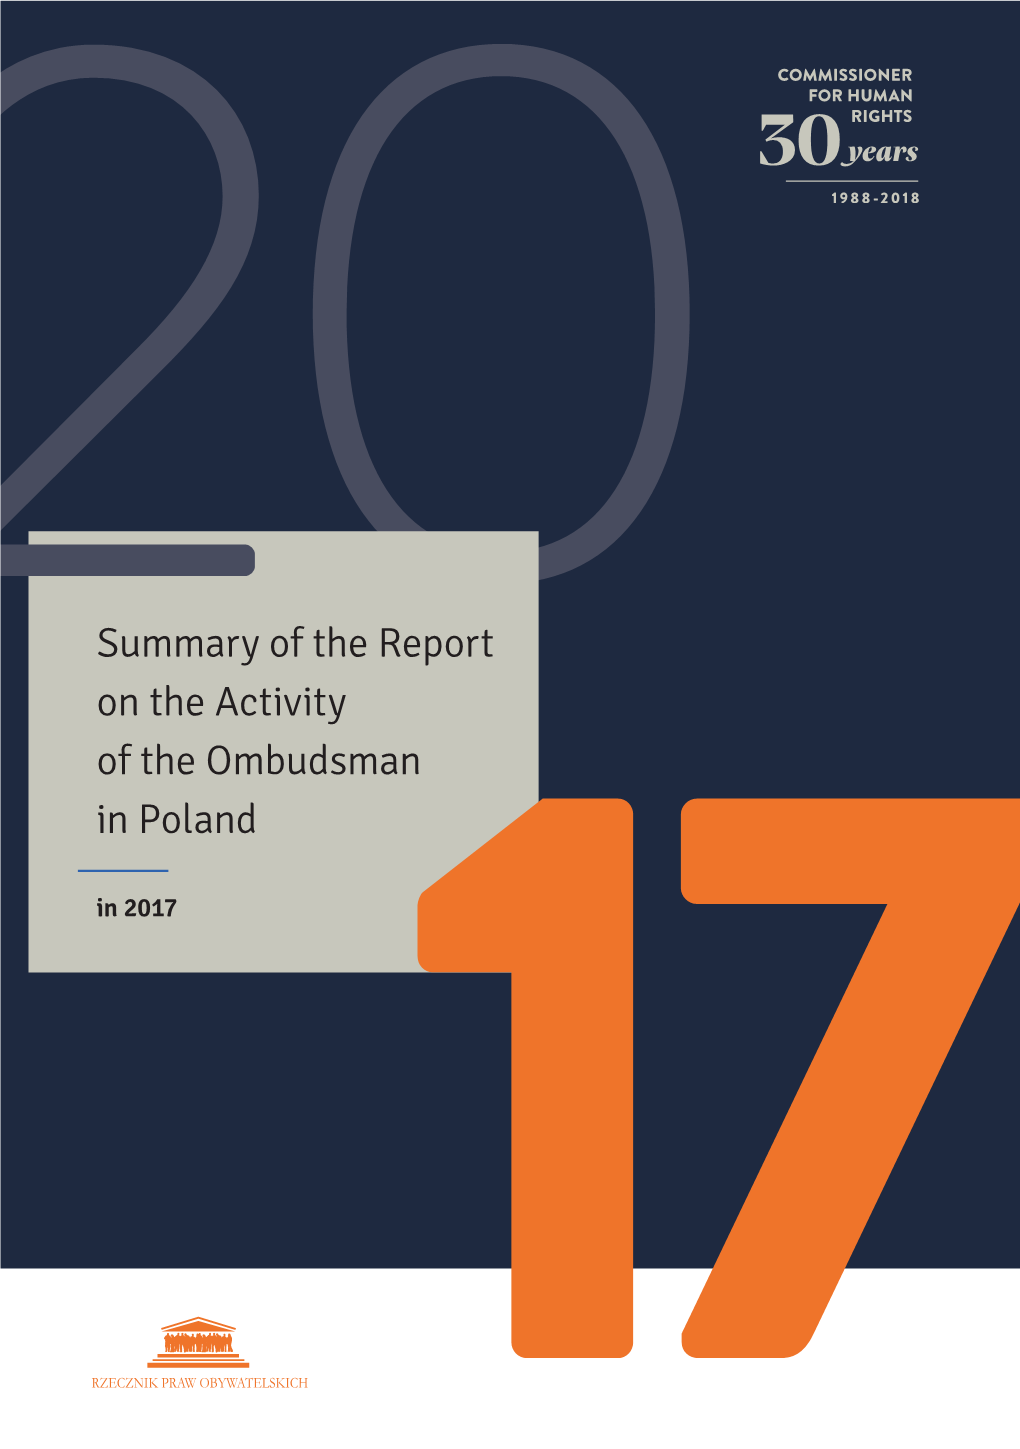 Summary of the Report on the Activity of the Ombudsman in Poland